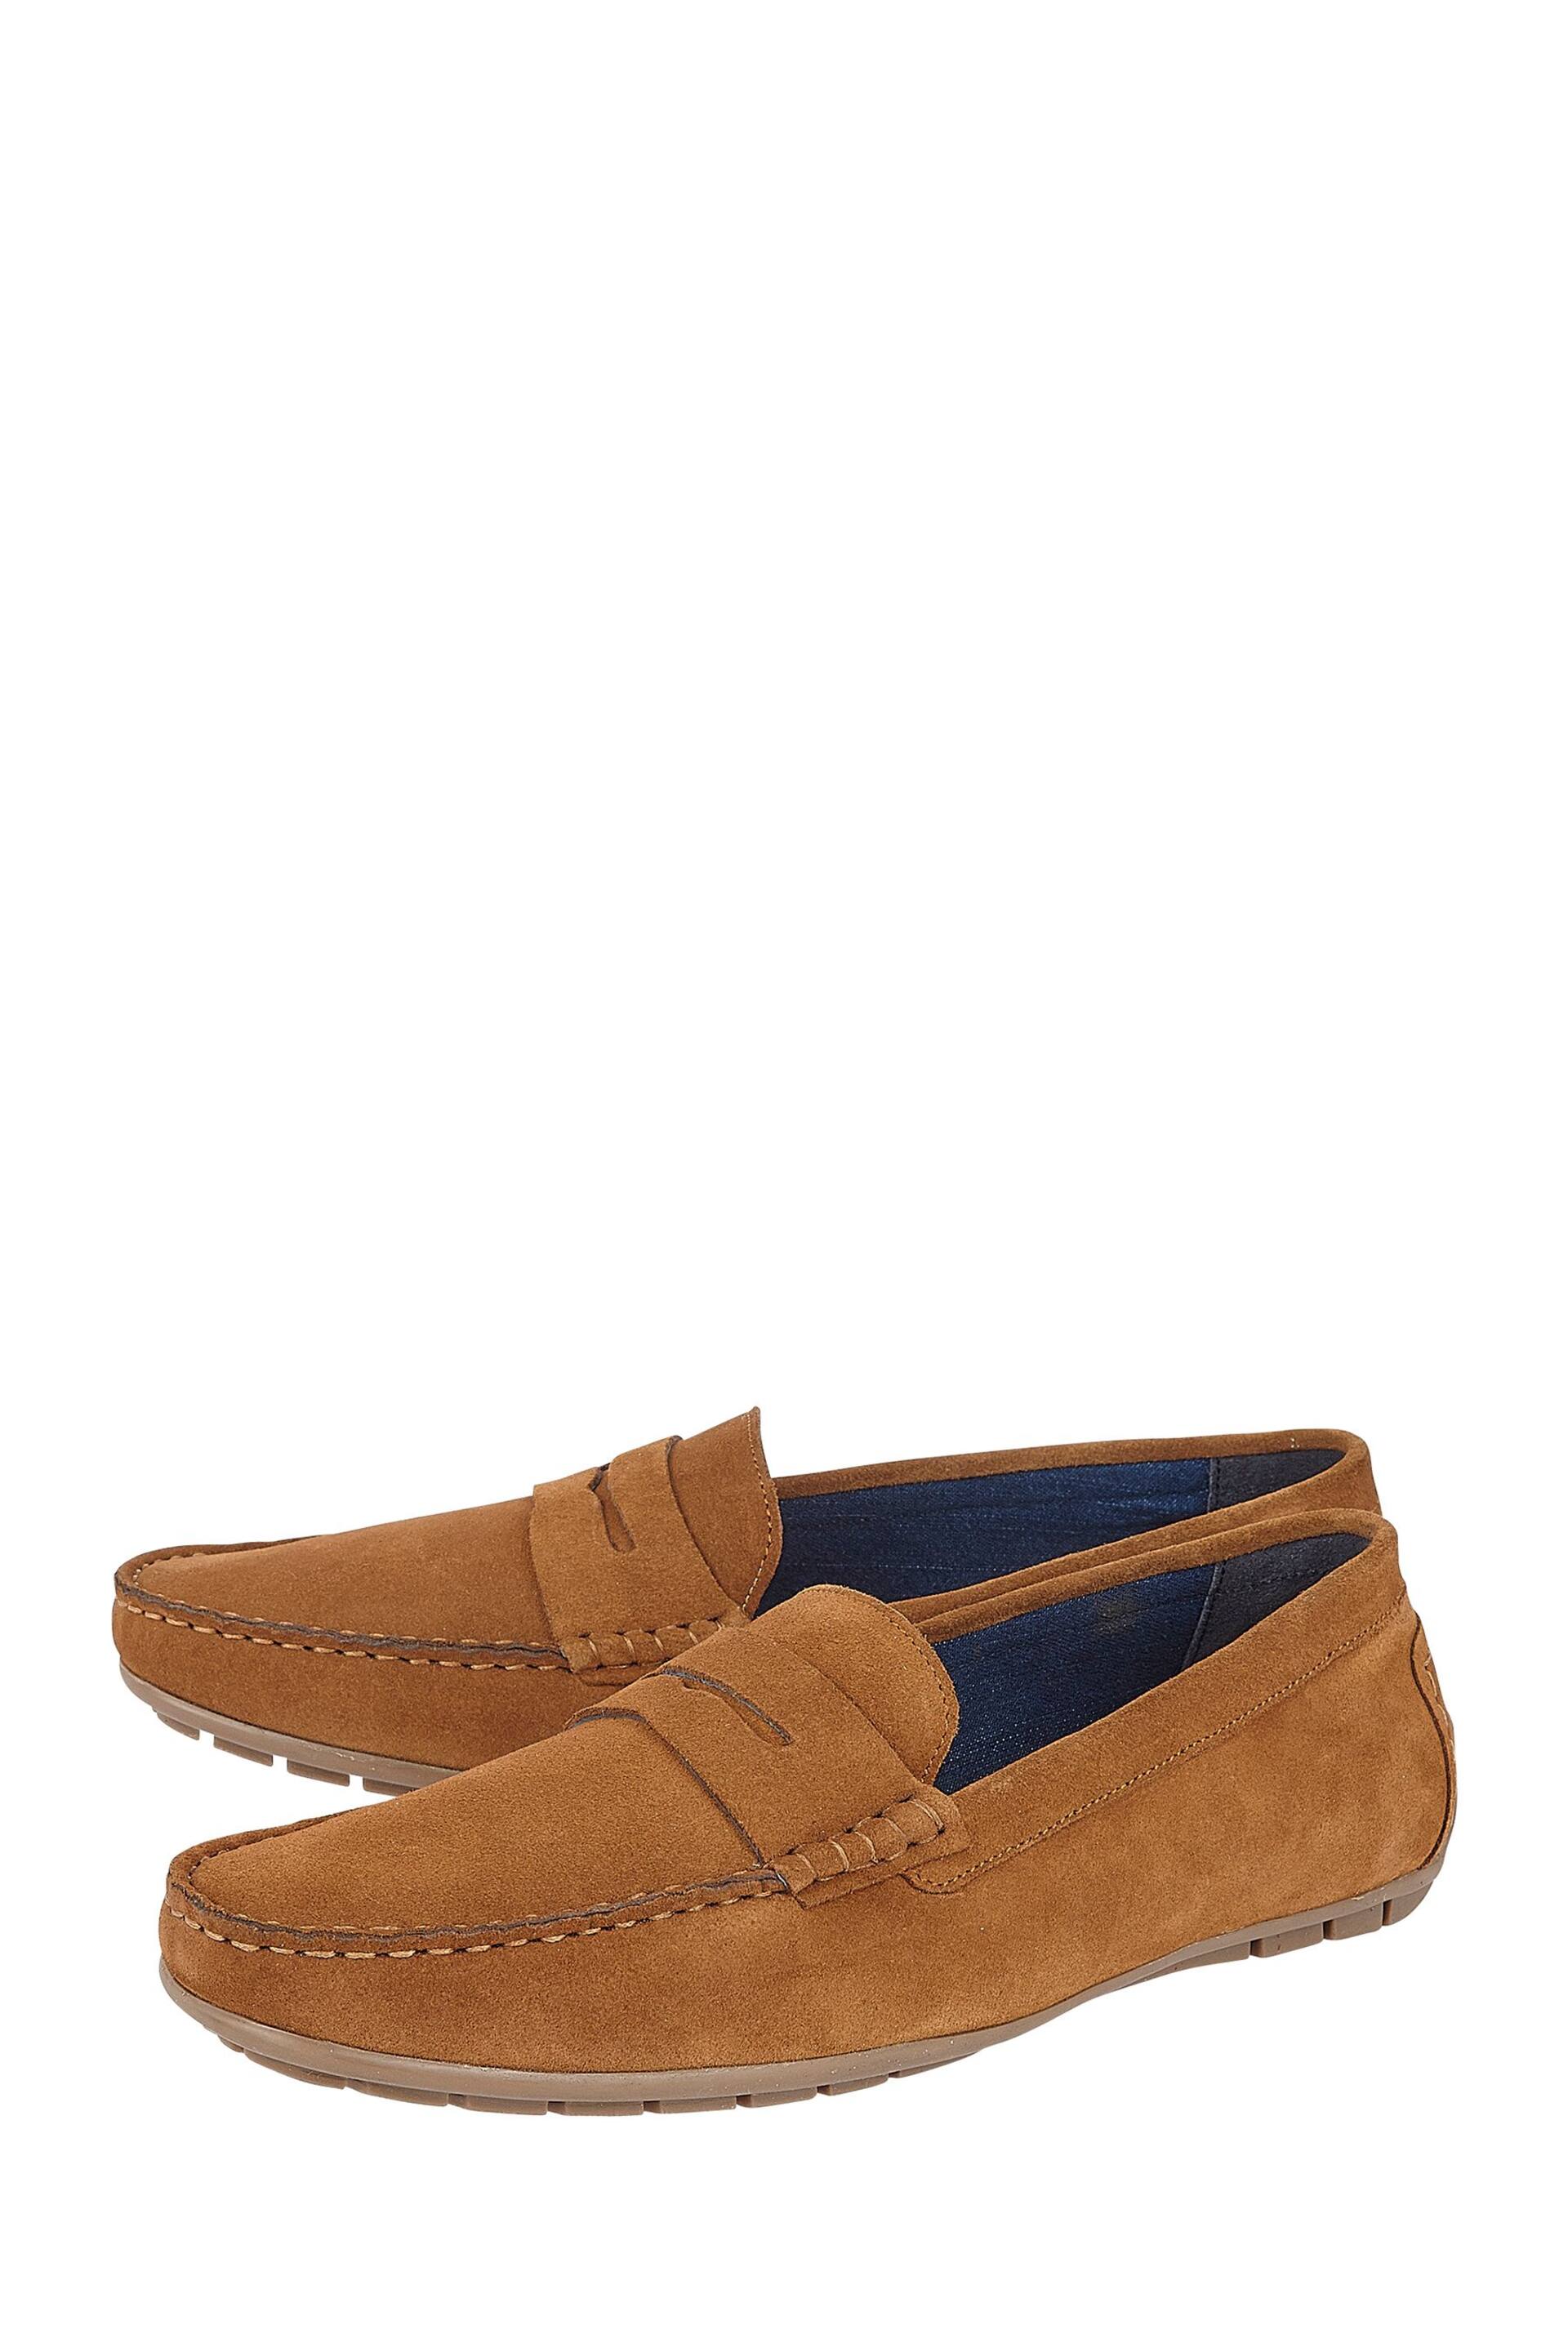 Lotus Brown Casual Slip-Ons Driving Shoes - Image 2 of 4